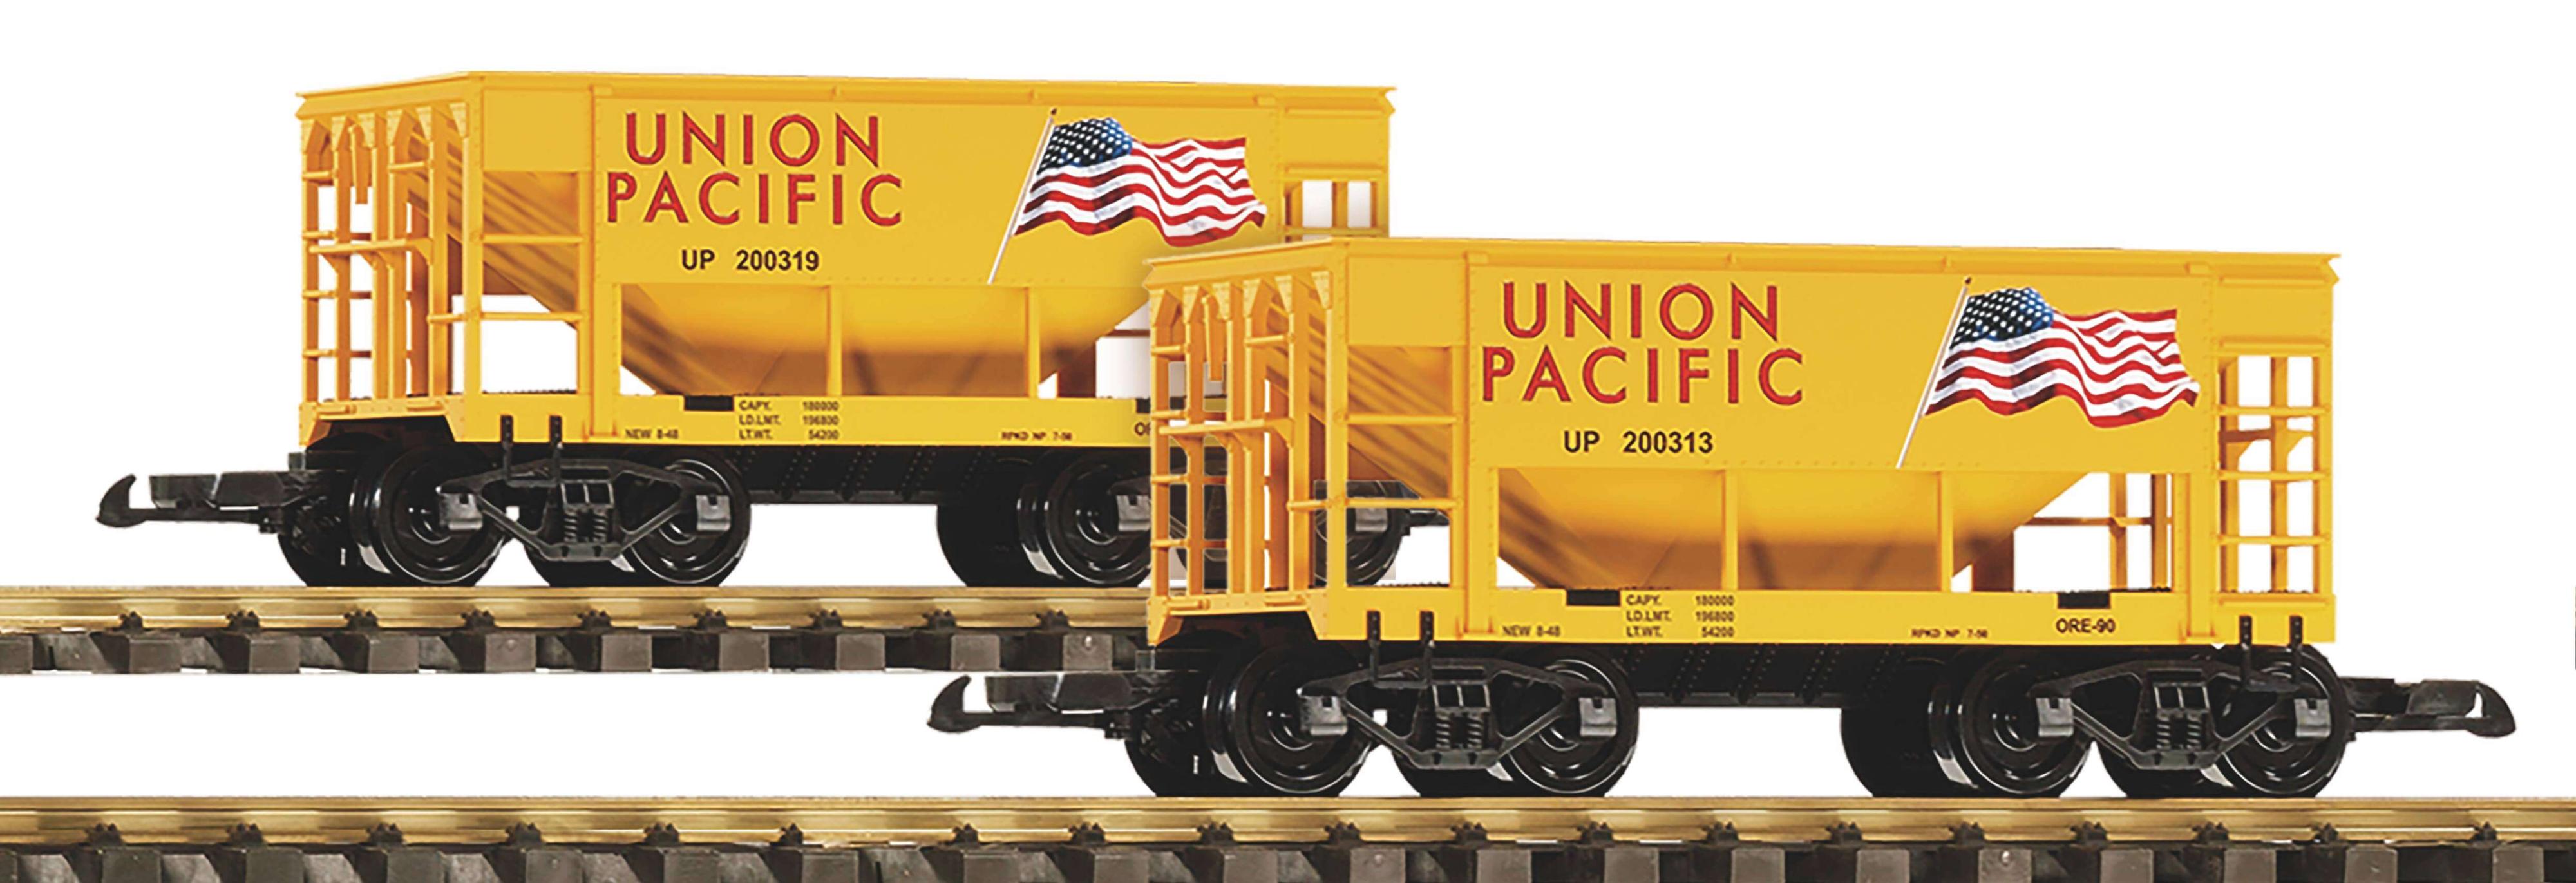 G Scale Union Pacific Ore Car w/ Americna Flag (2 pack)